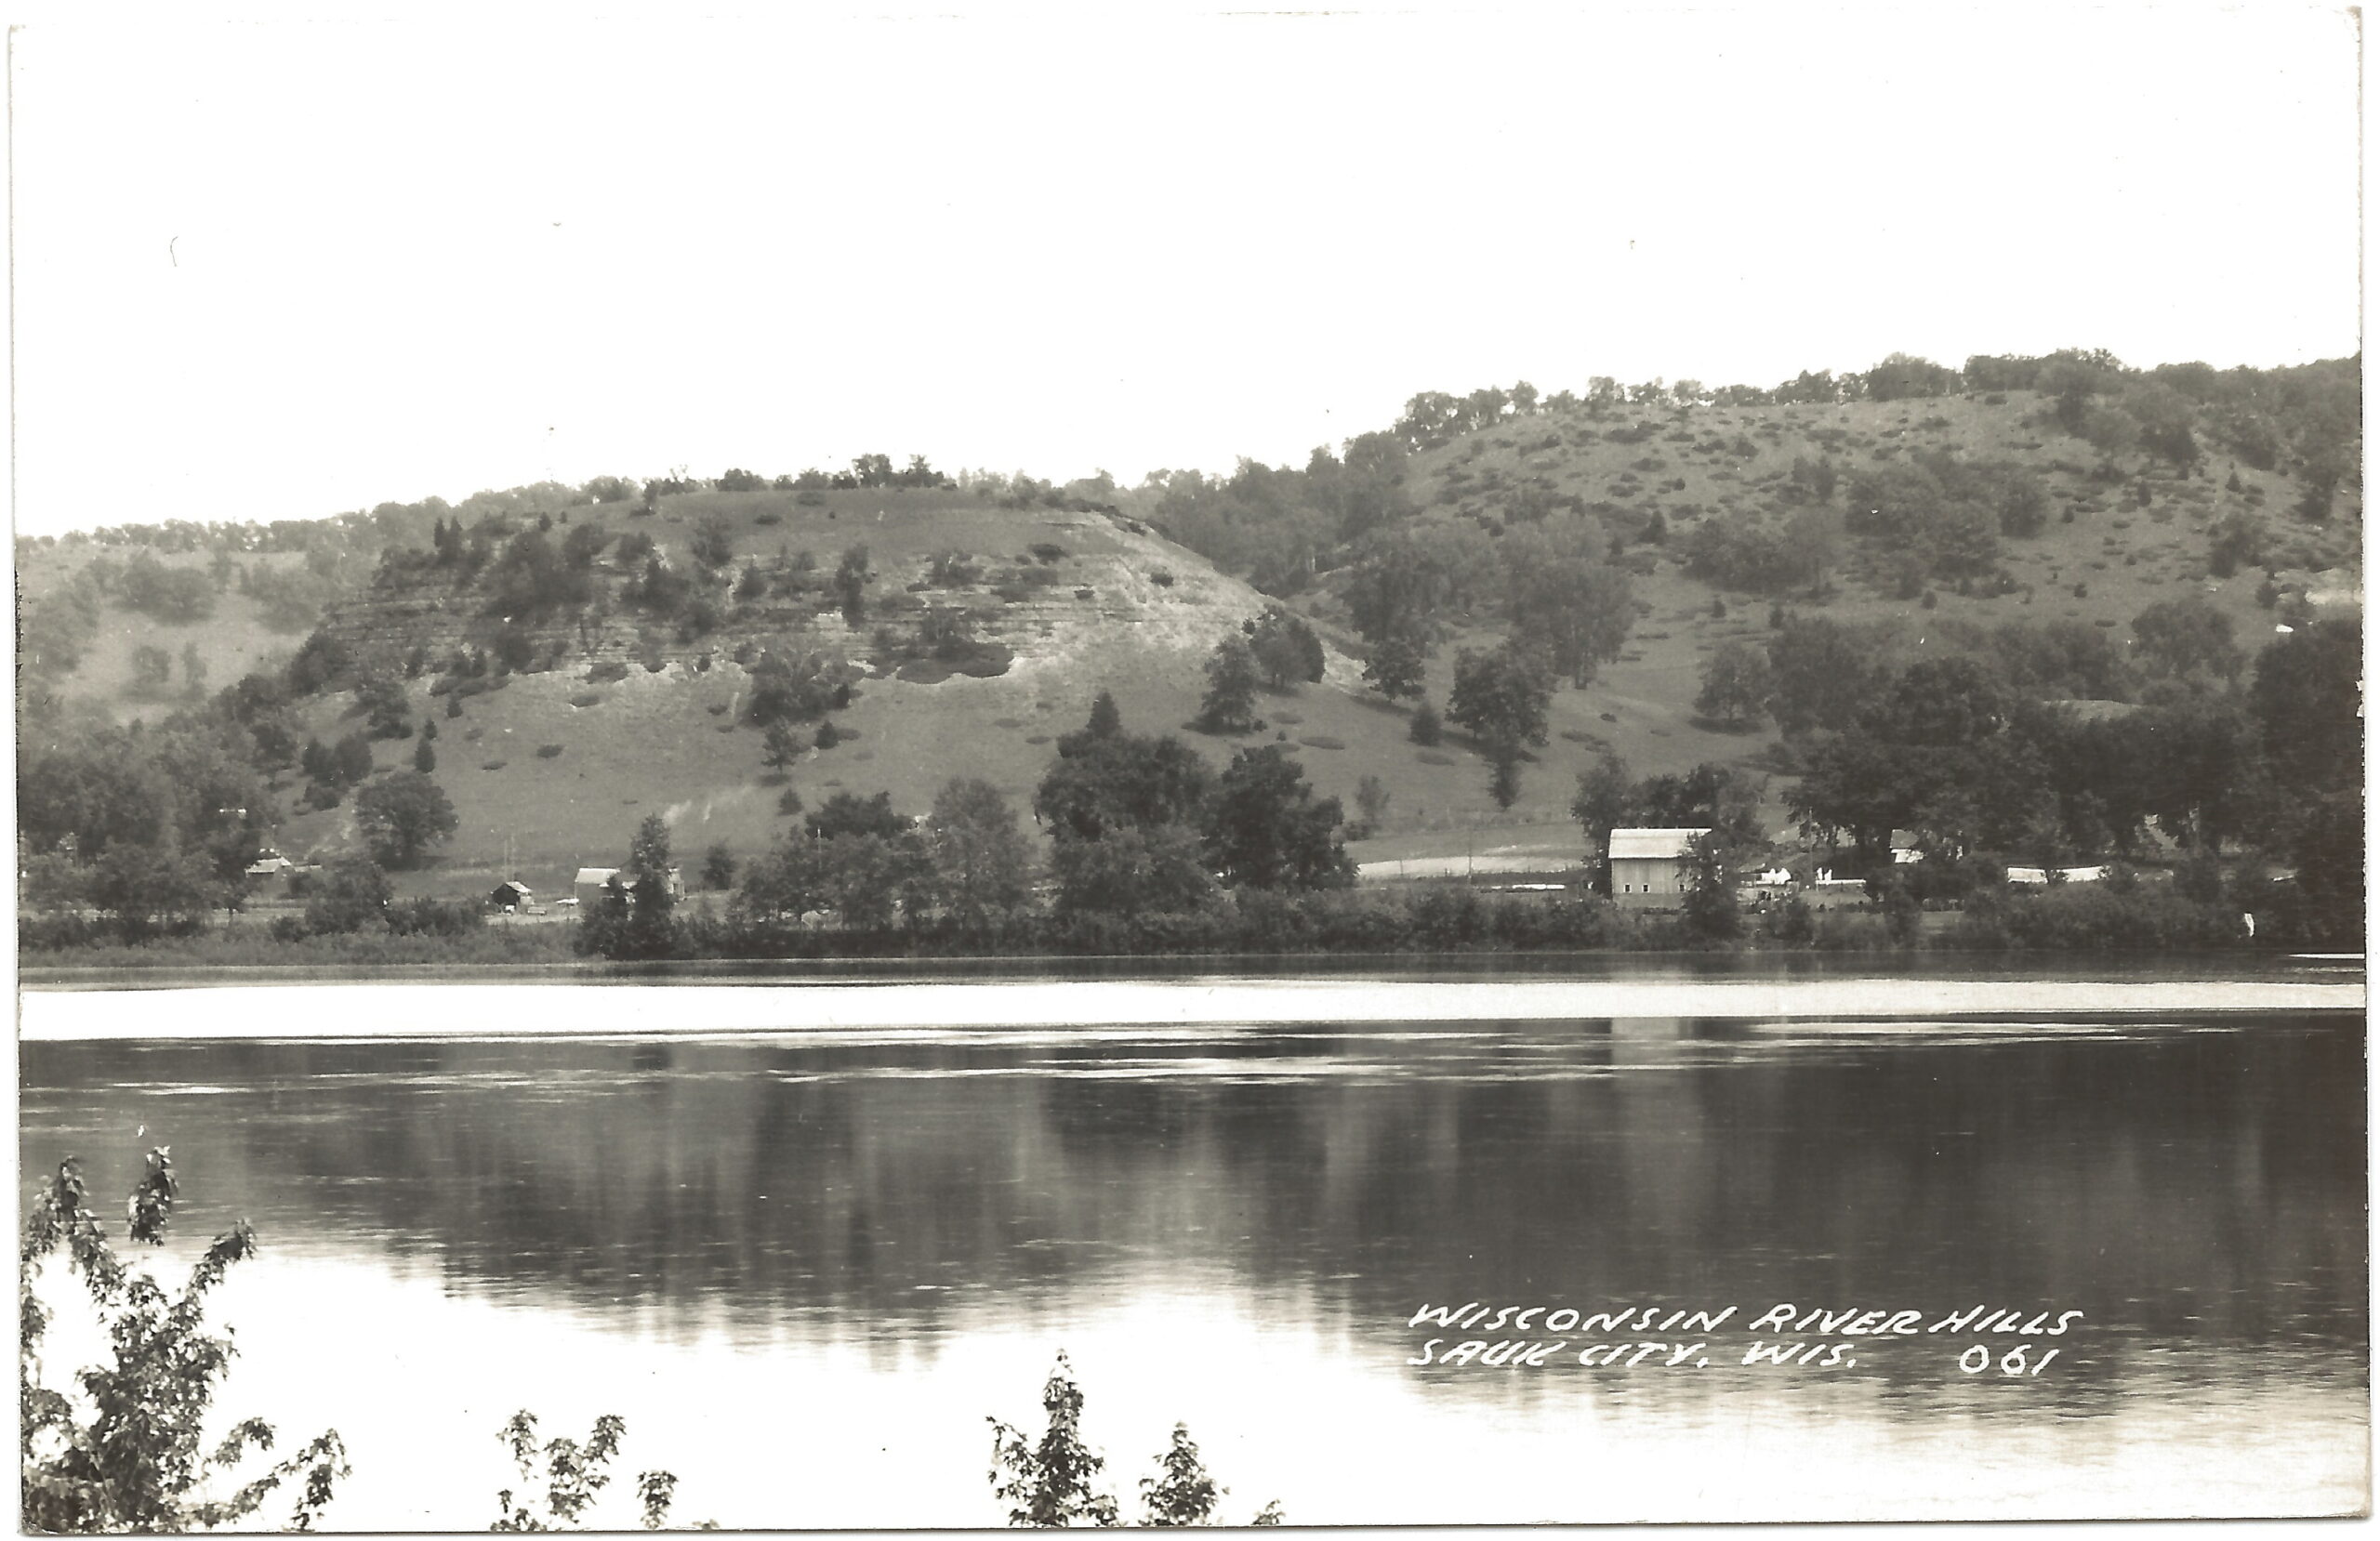 A black and white image of the Wisconsin River in Sauk City in the 1940s.